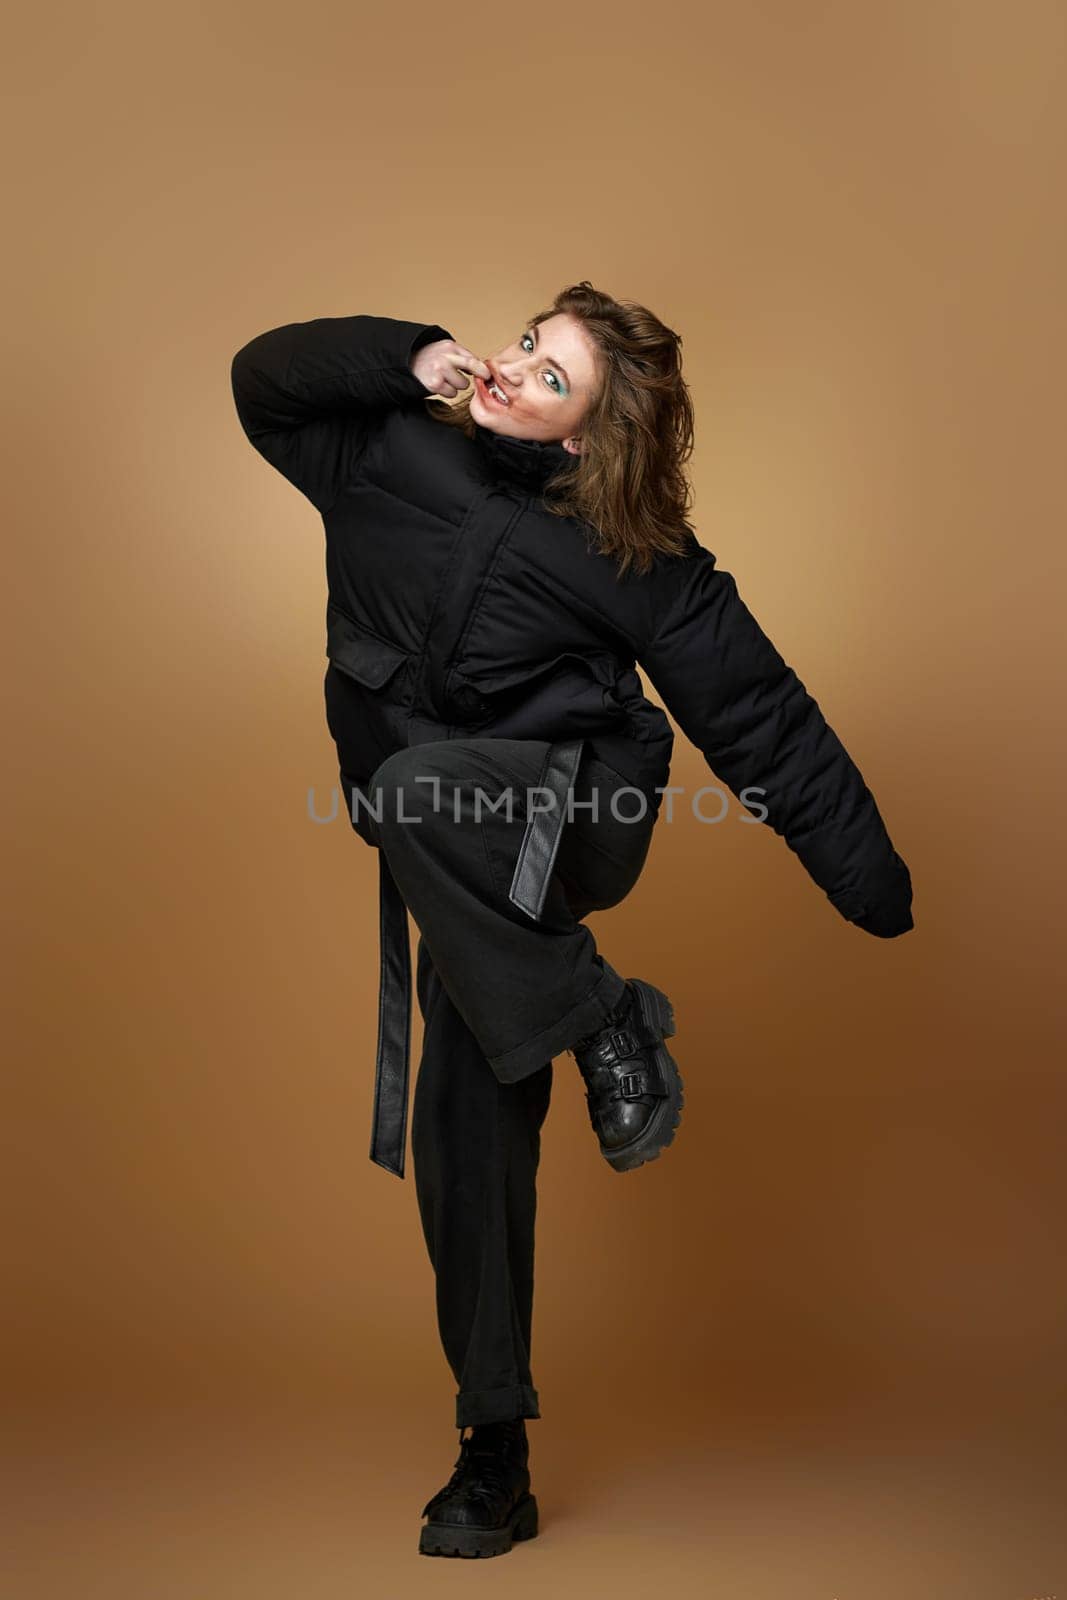 young stylish woman with bright makeup posing in black jacket and pants on beige background. total black look